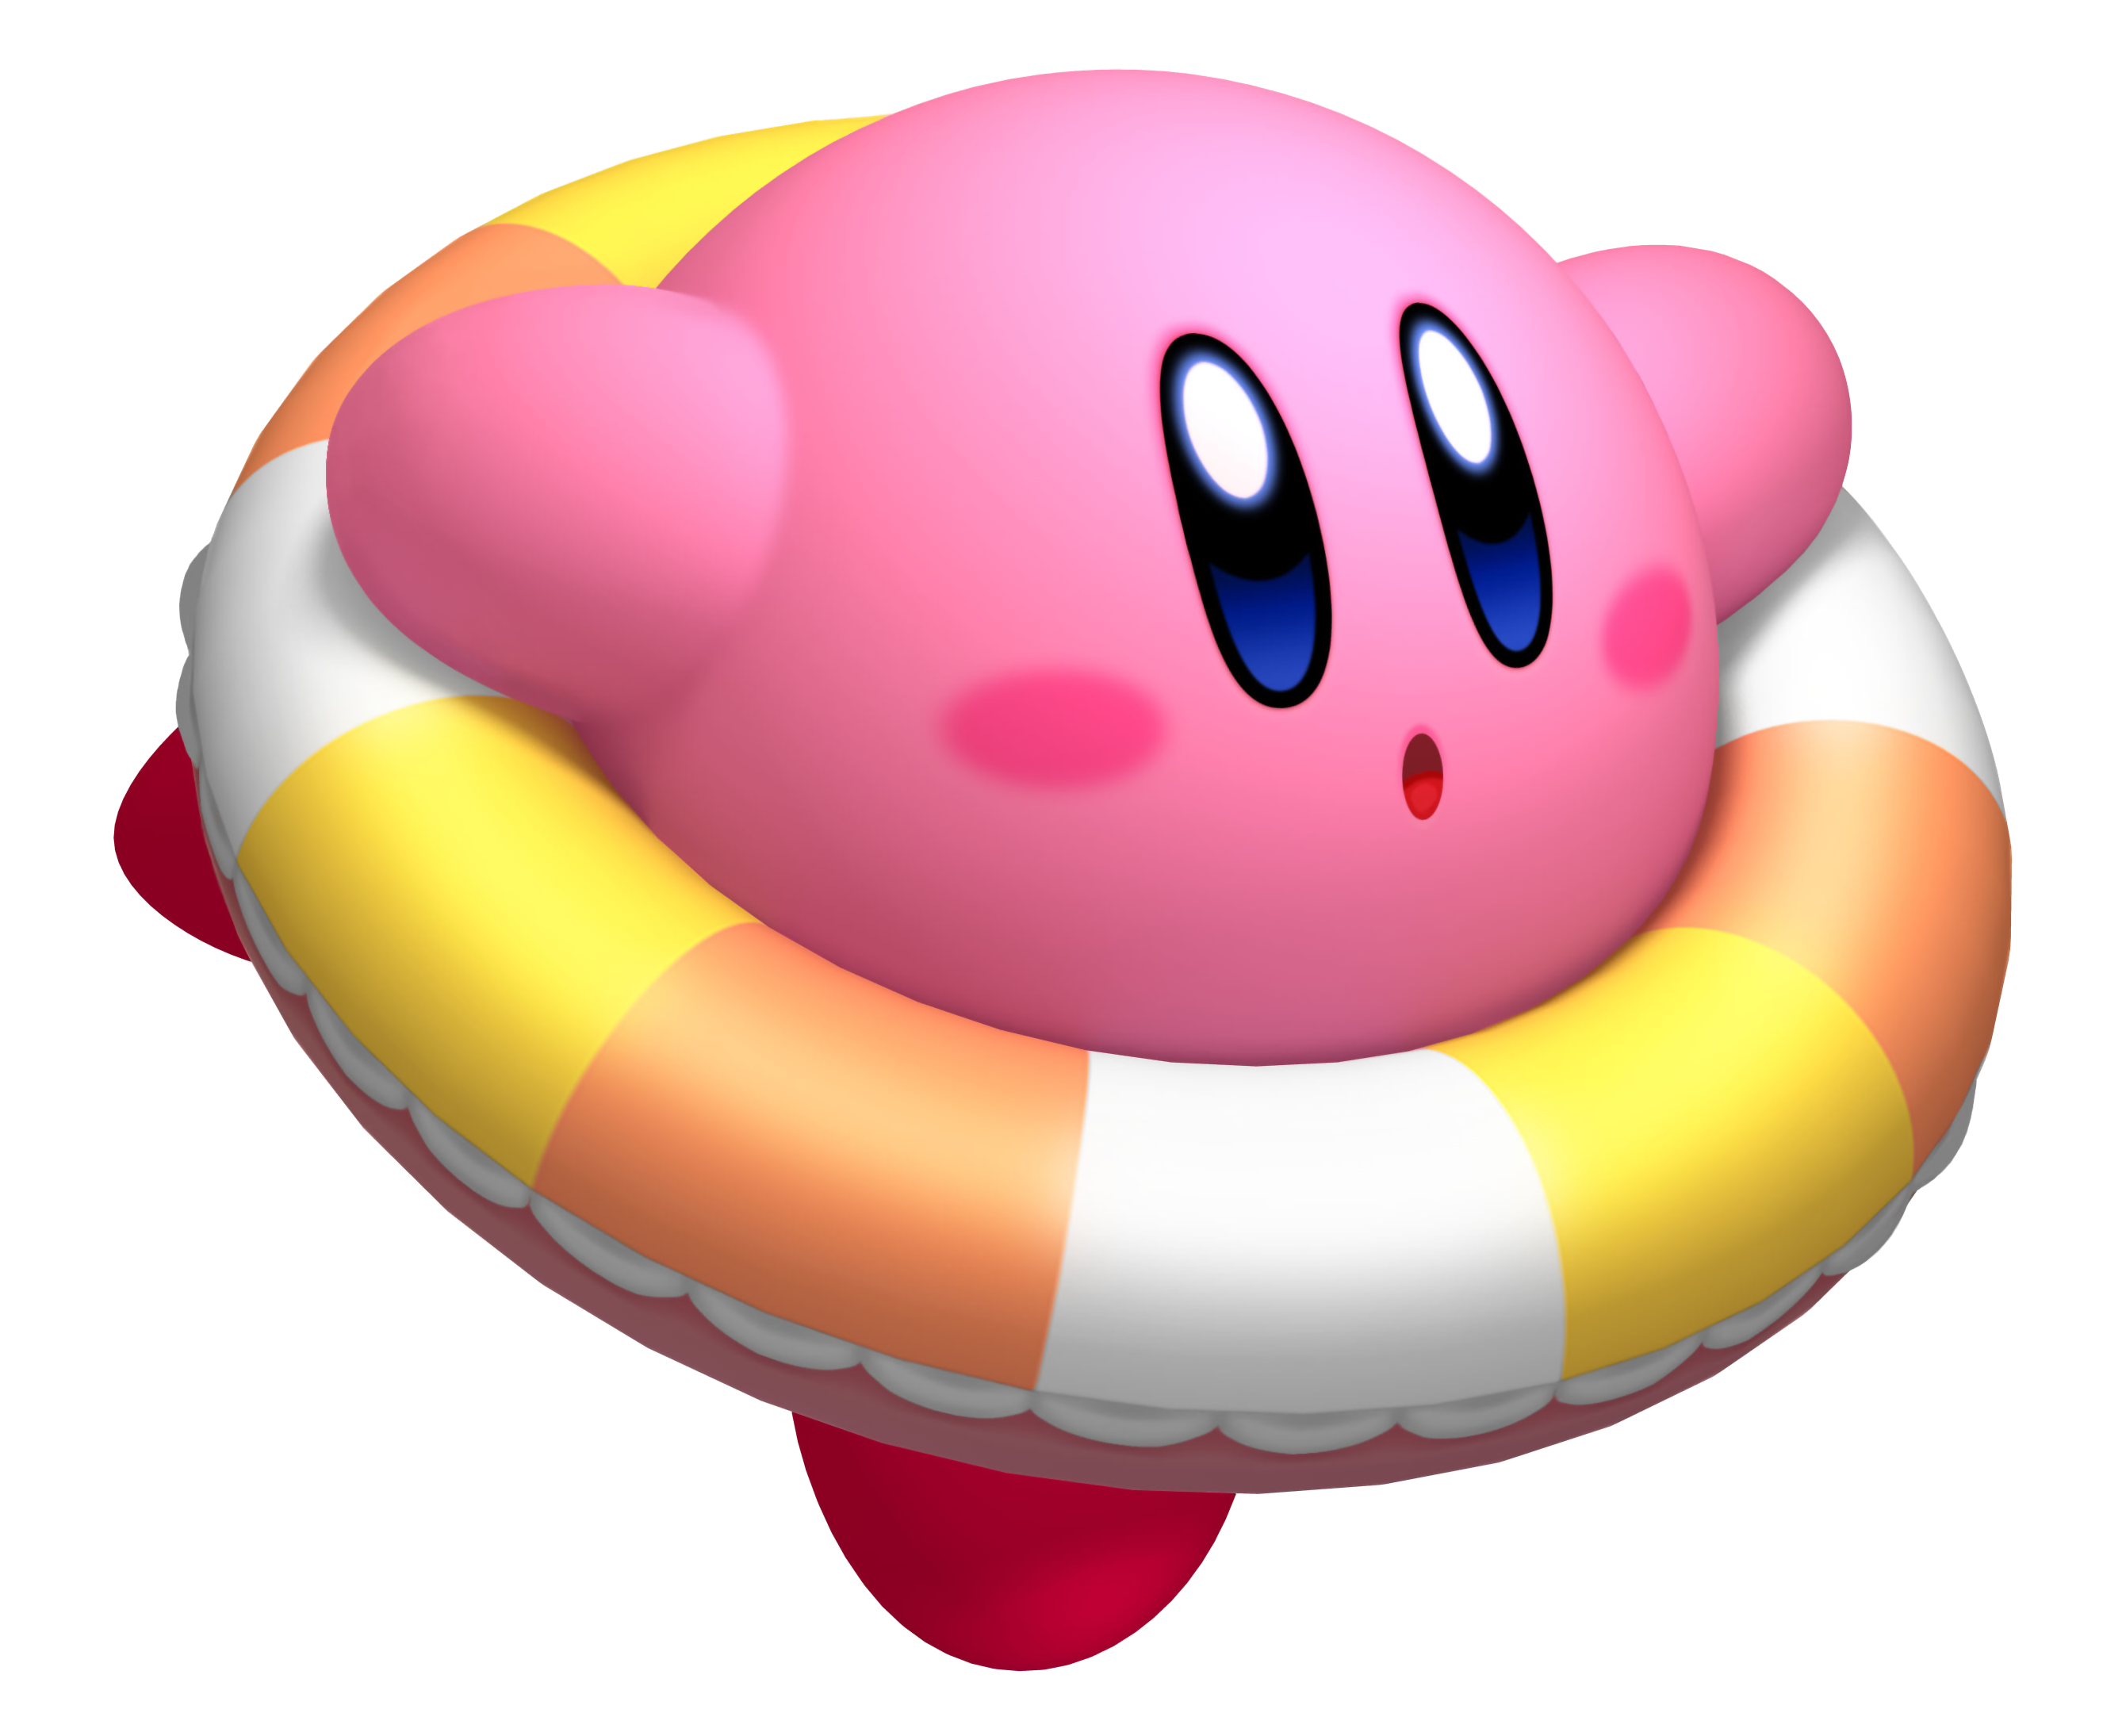 Kirbyimage Krtdl Kirby Swimpng Wiki The Encyclopedia